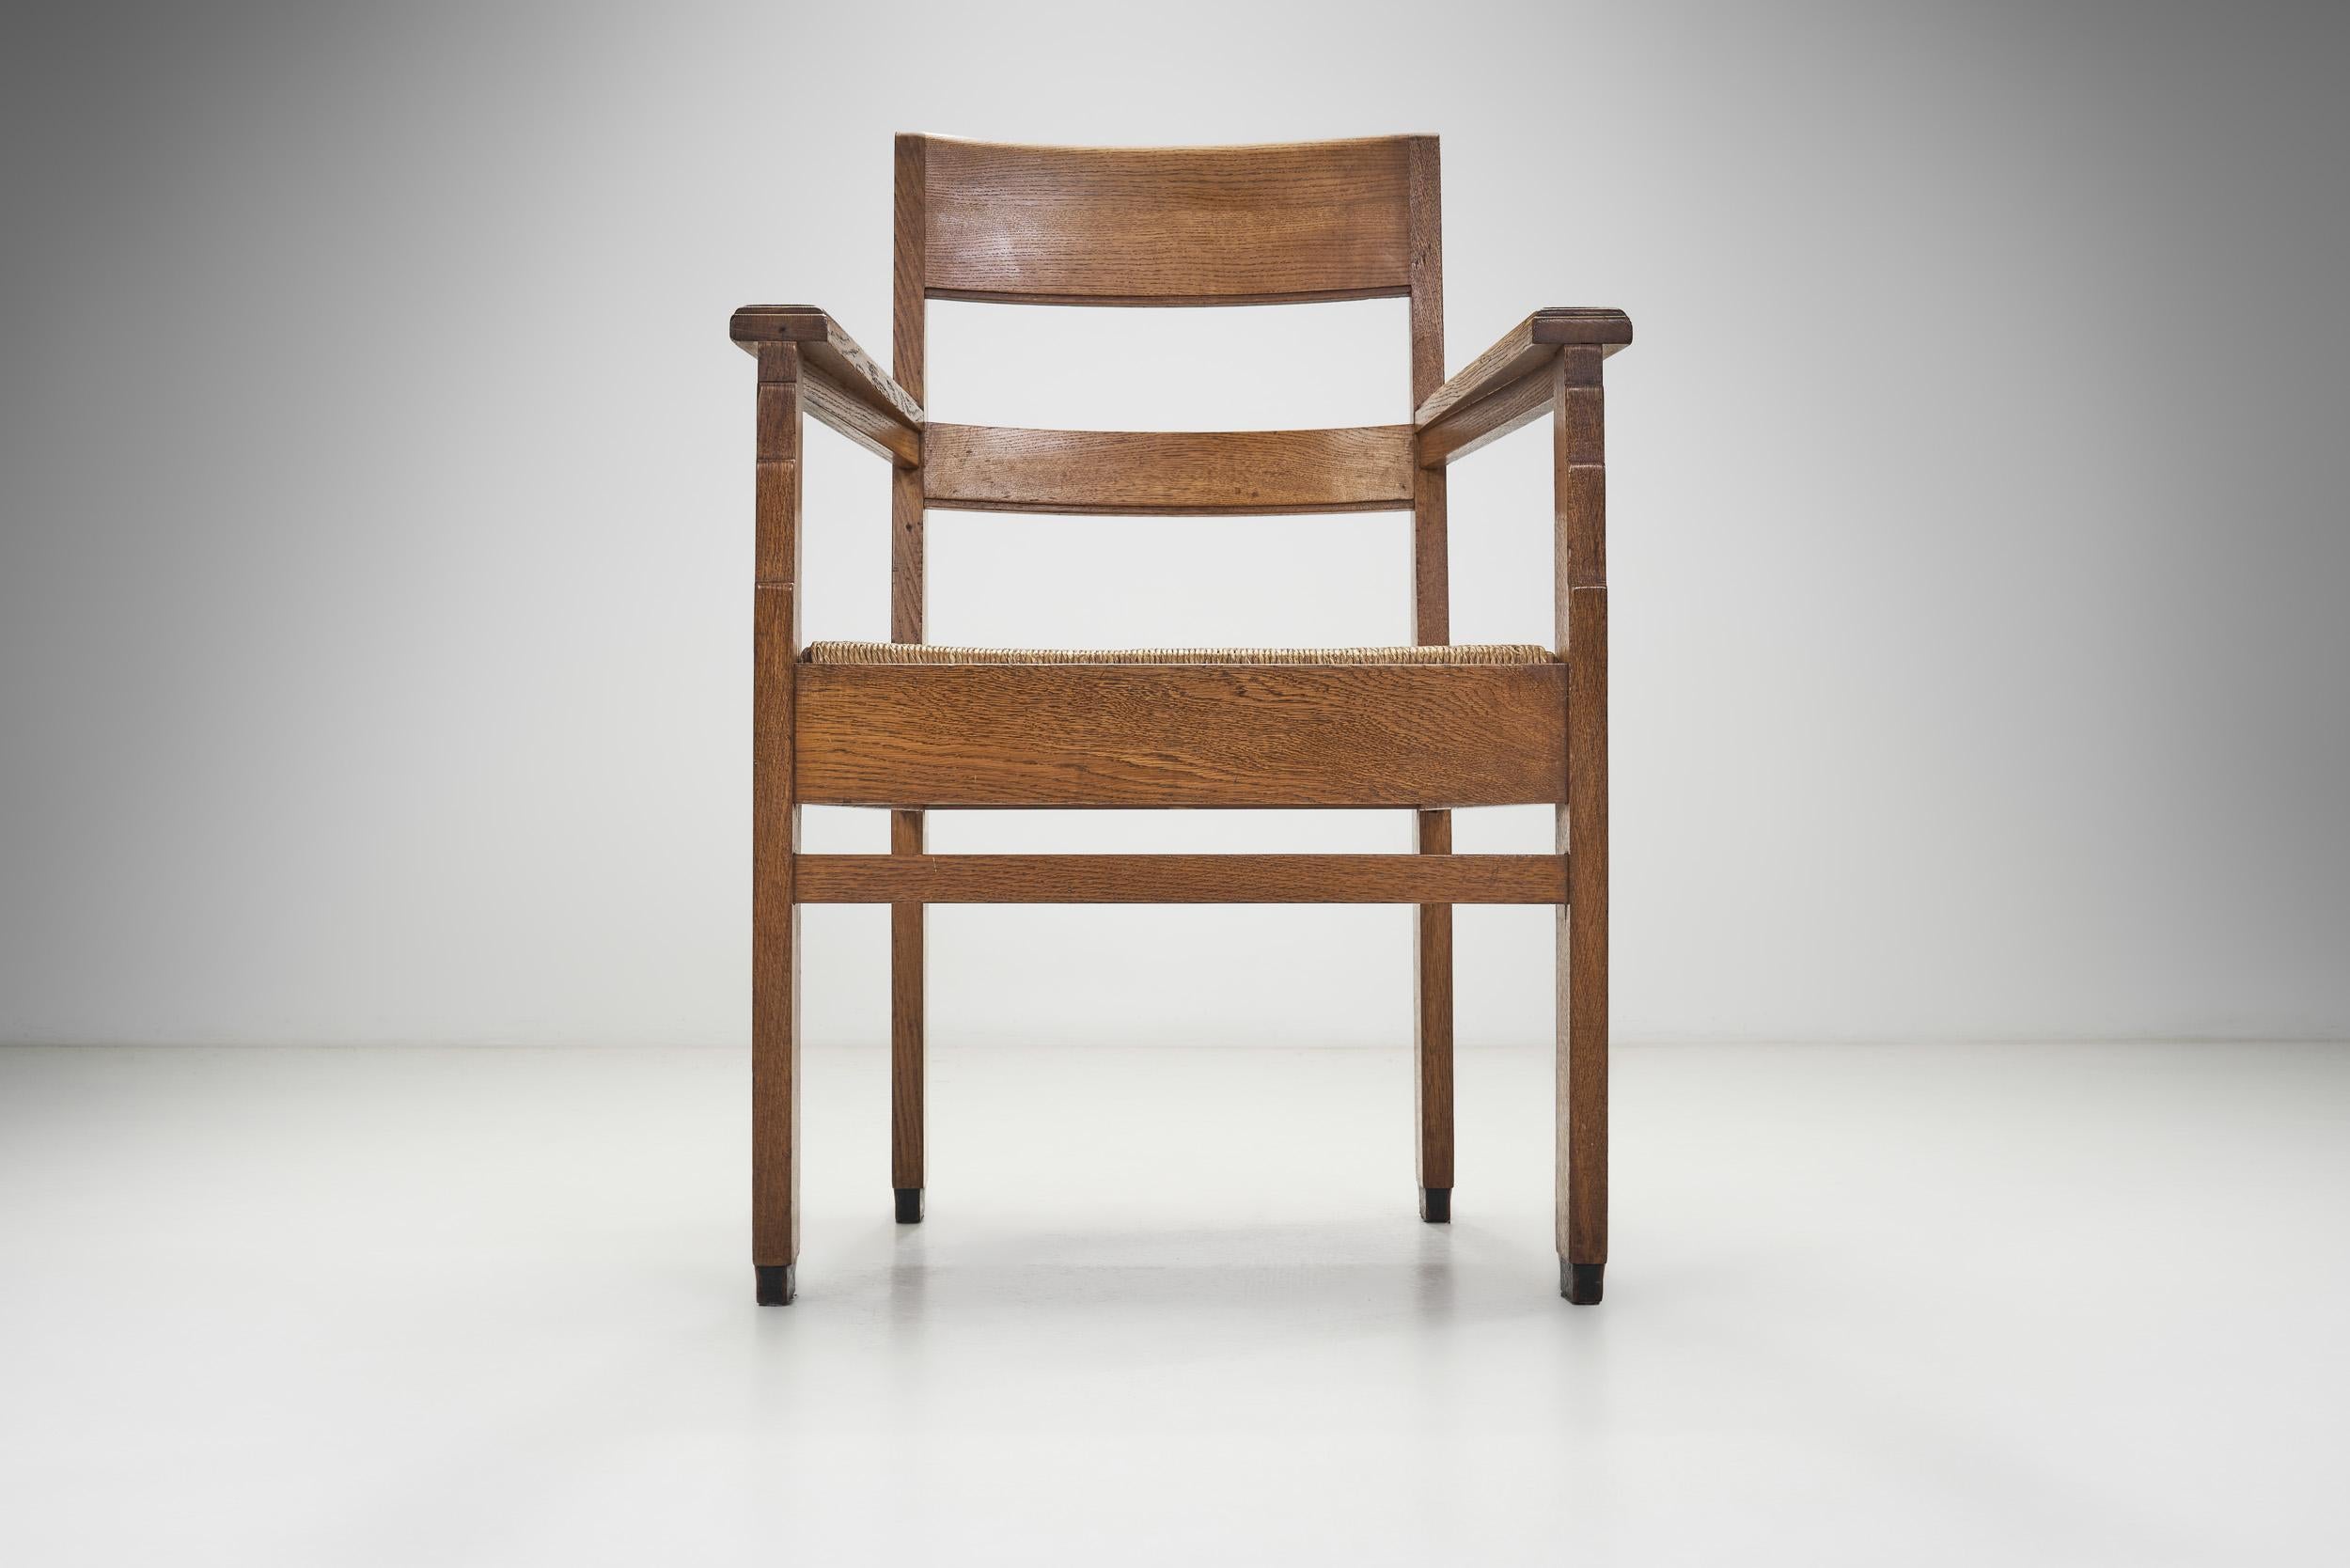 Dutch Oak Art Deco Chairs with Rush Seats, The Netherlands 1920s For Sale 8